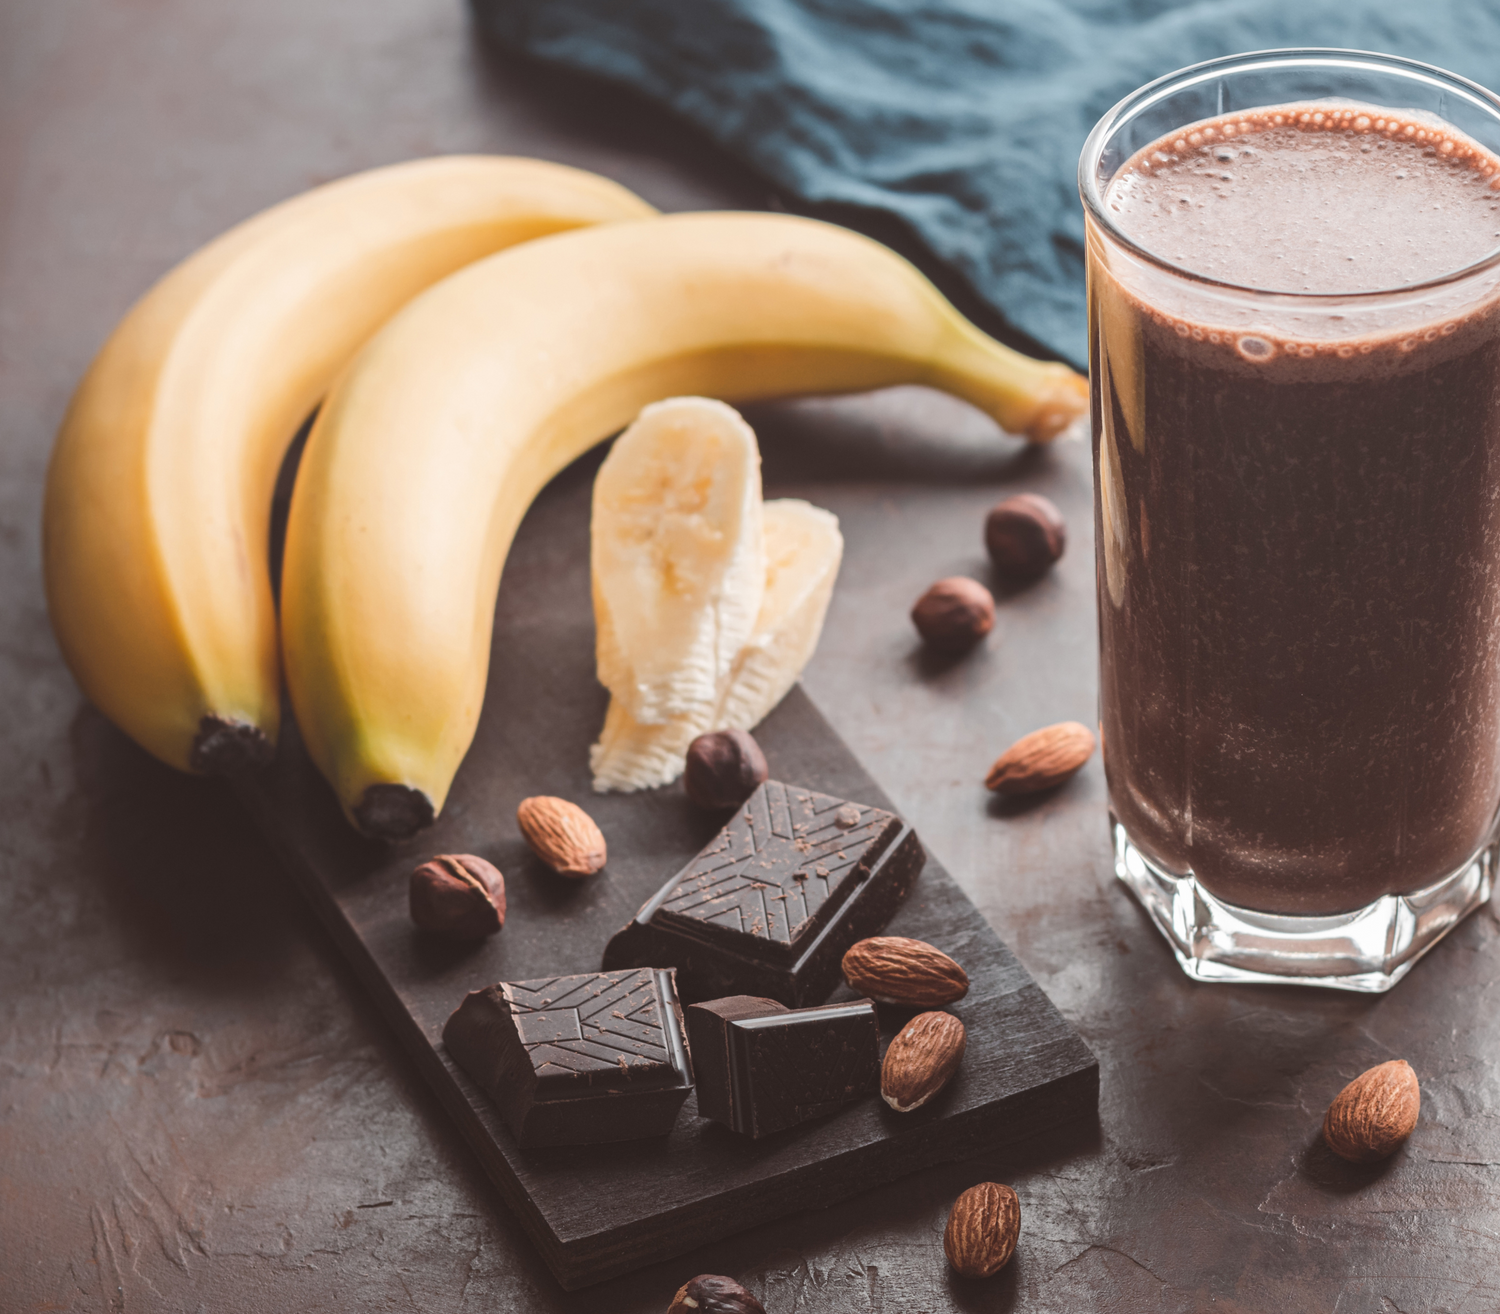 Foods to Boost Your Microbiome - dark chocolate, banana and nuts